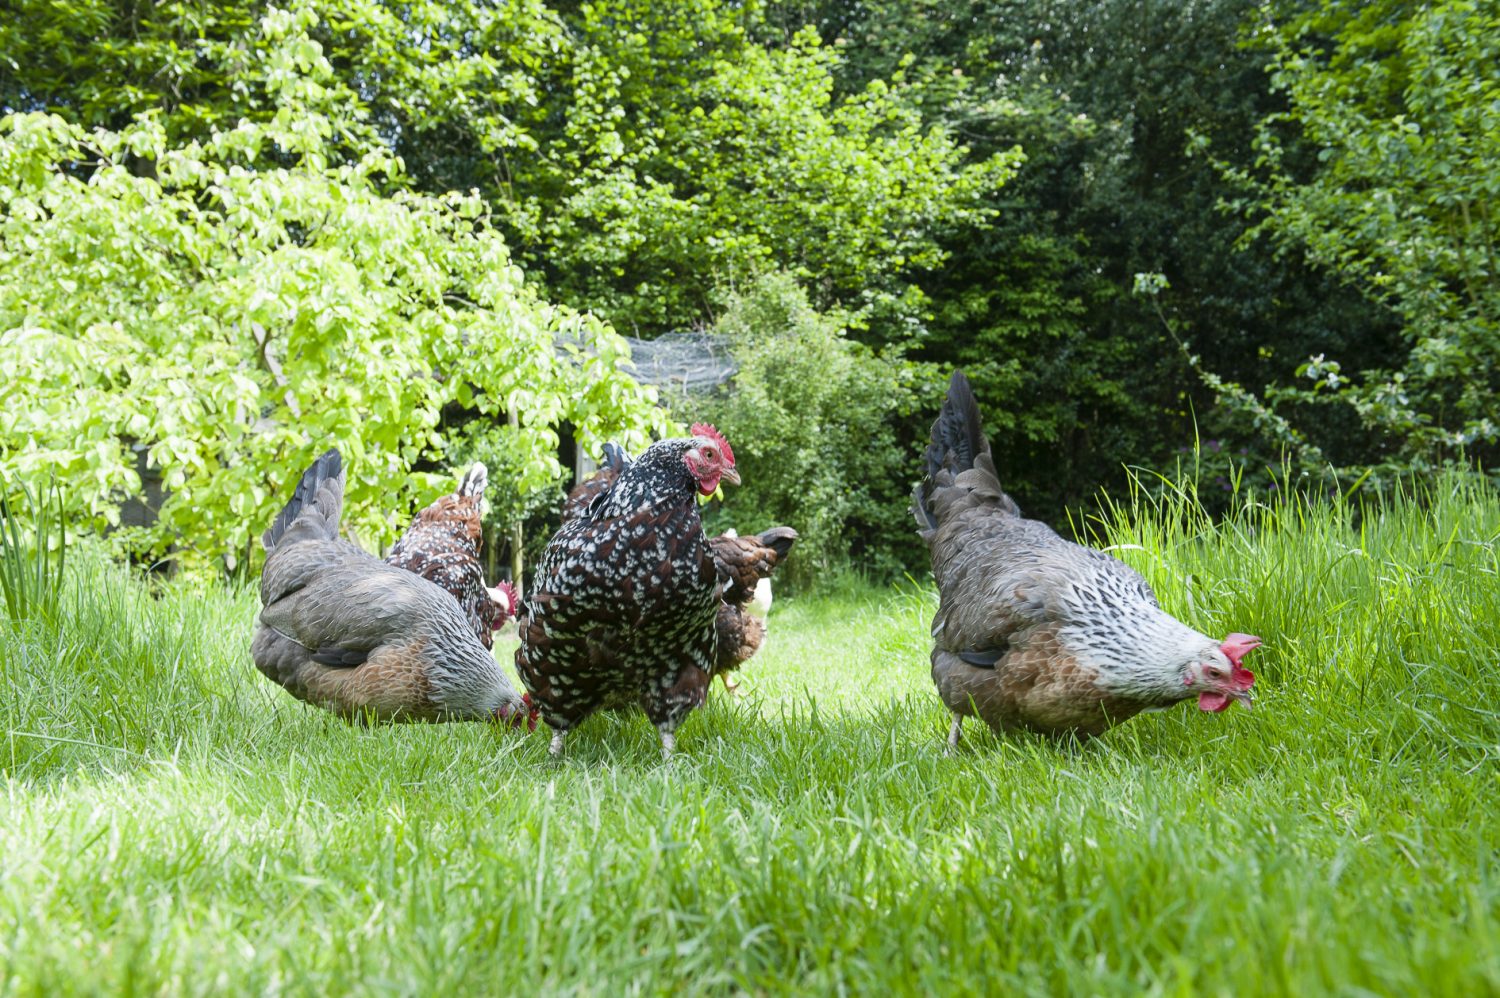 Wendy’s pampered hens enjoy scratching around at the top of the garden